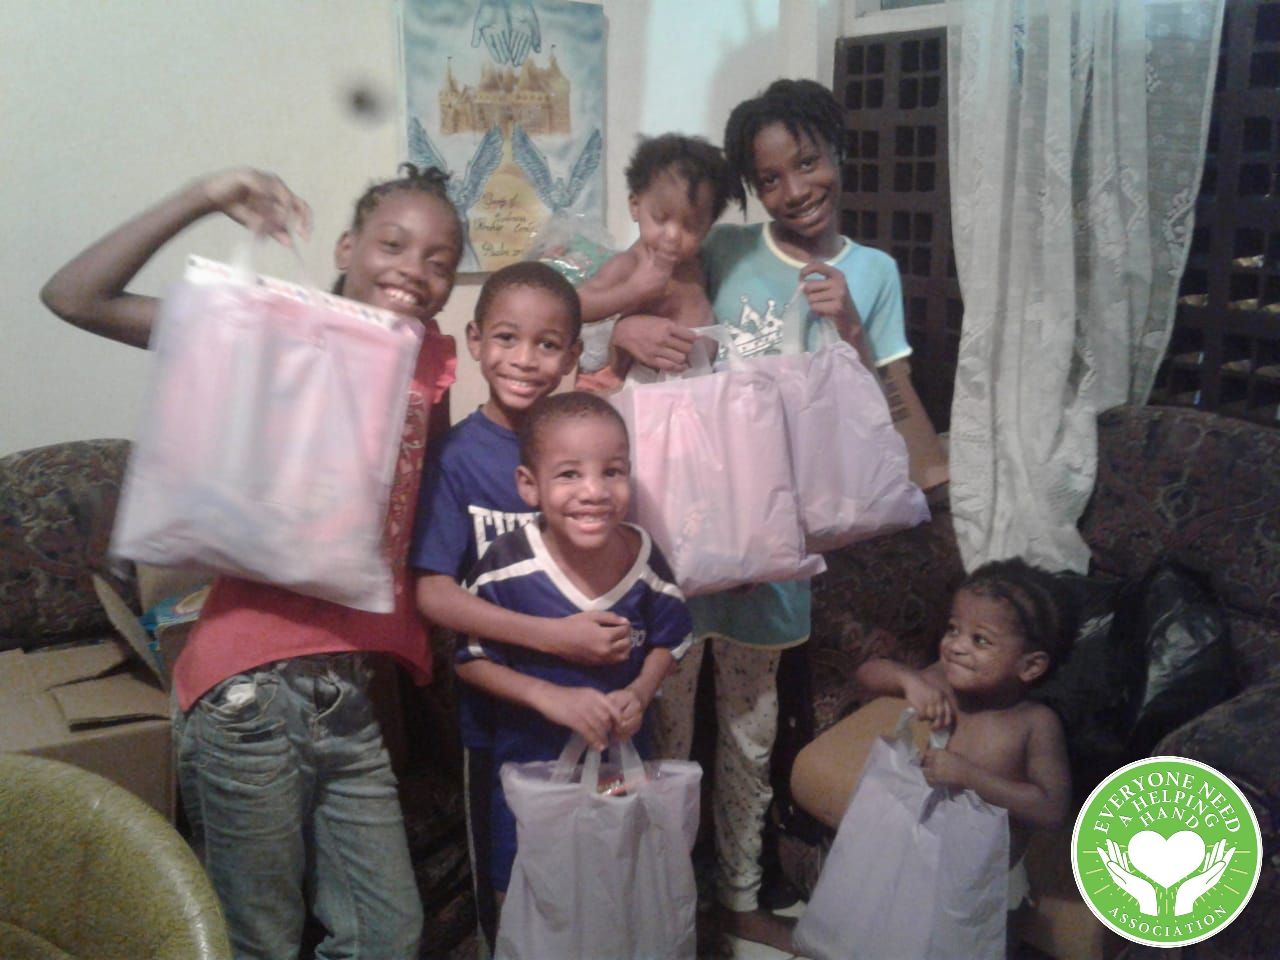 Children Receiving toys sponsored by the One Stop Shop, Online